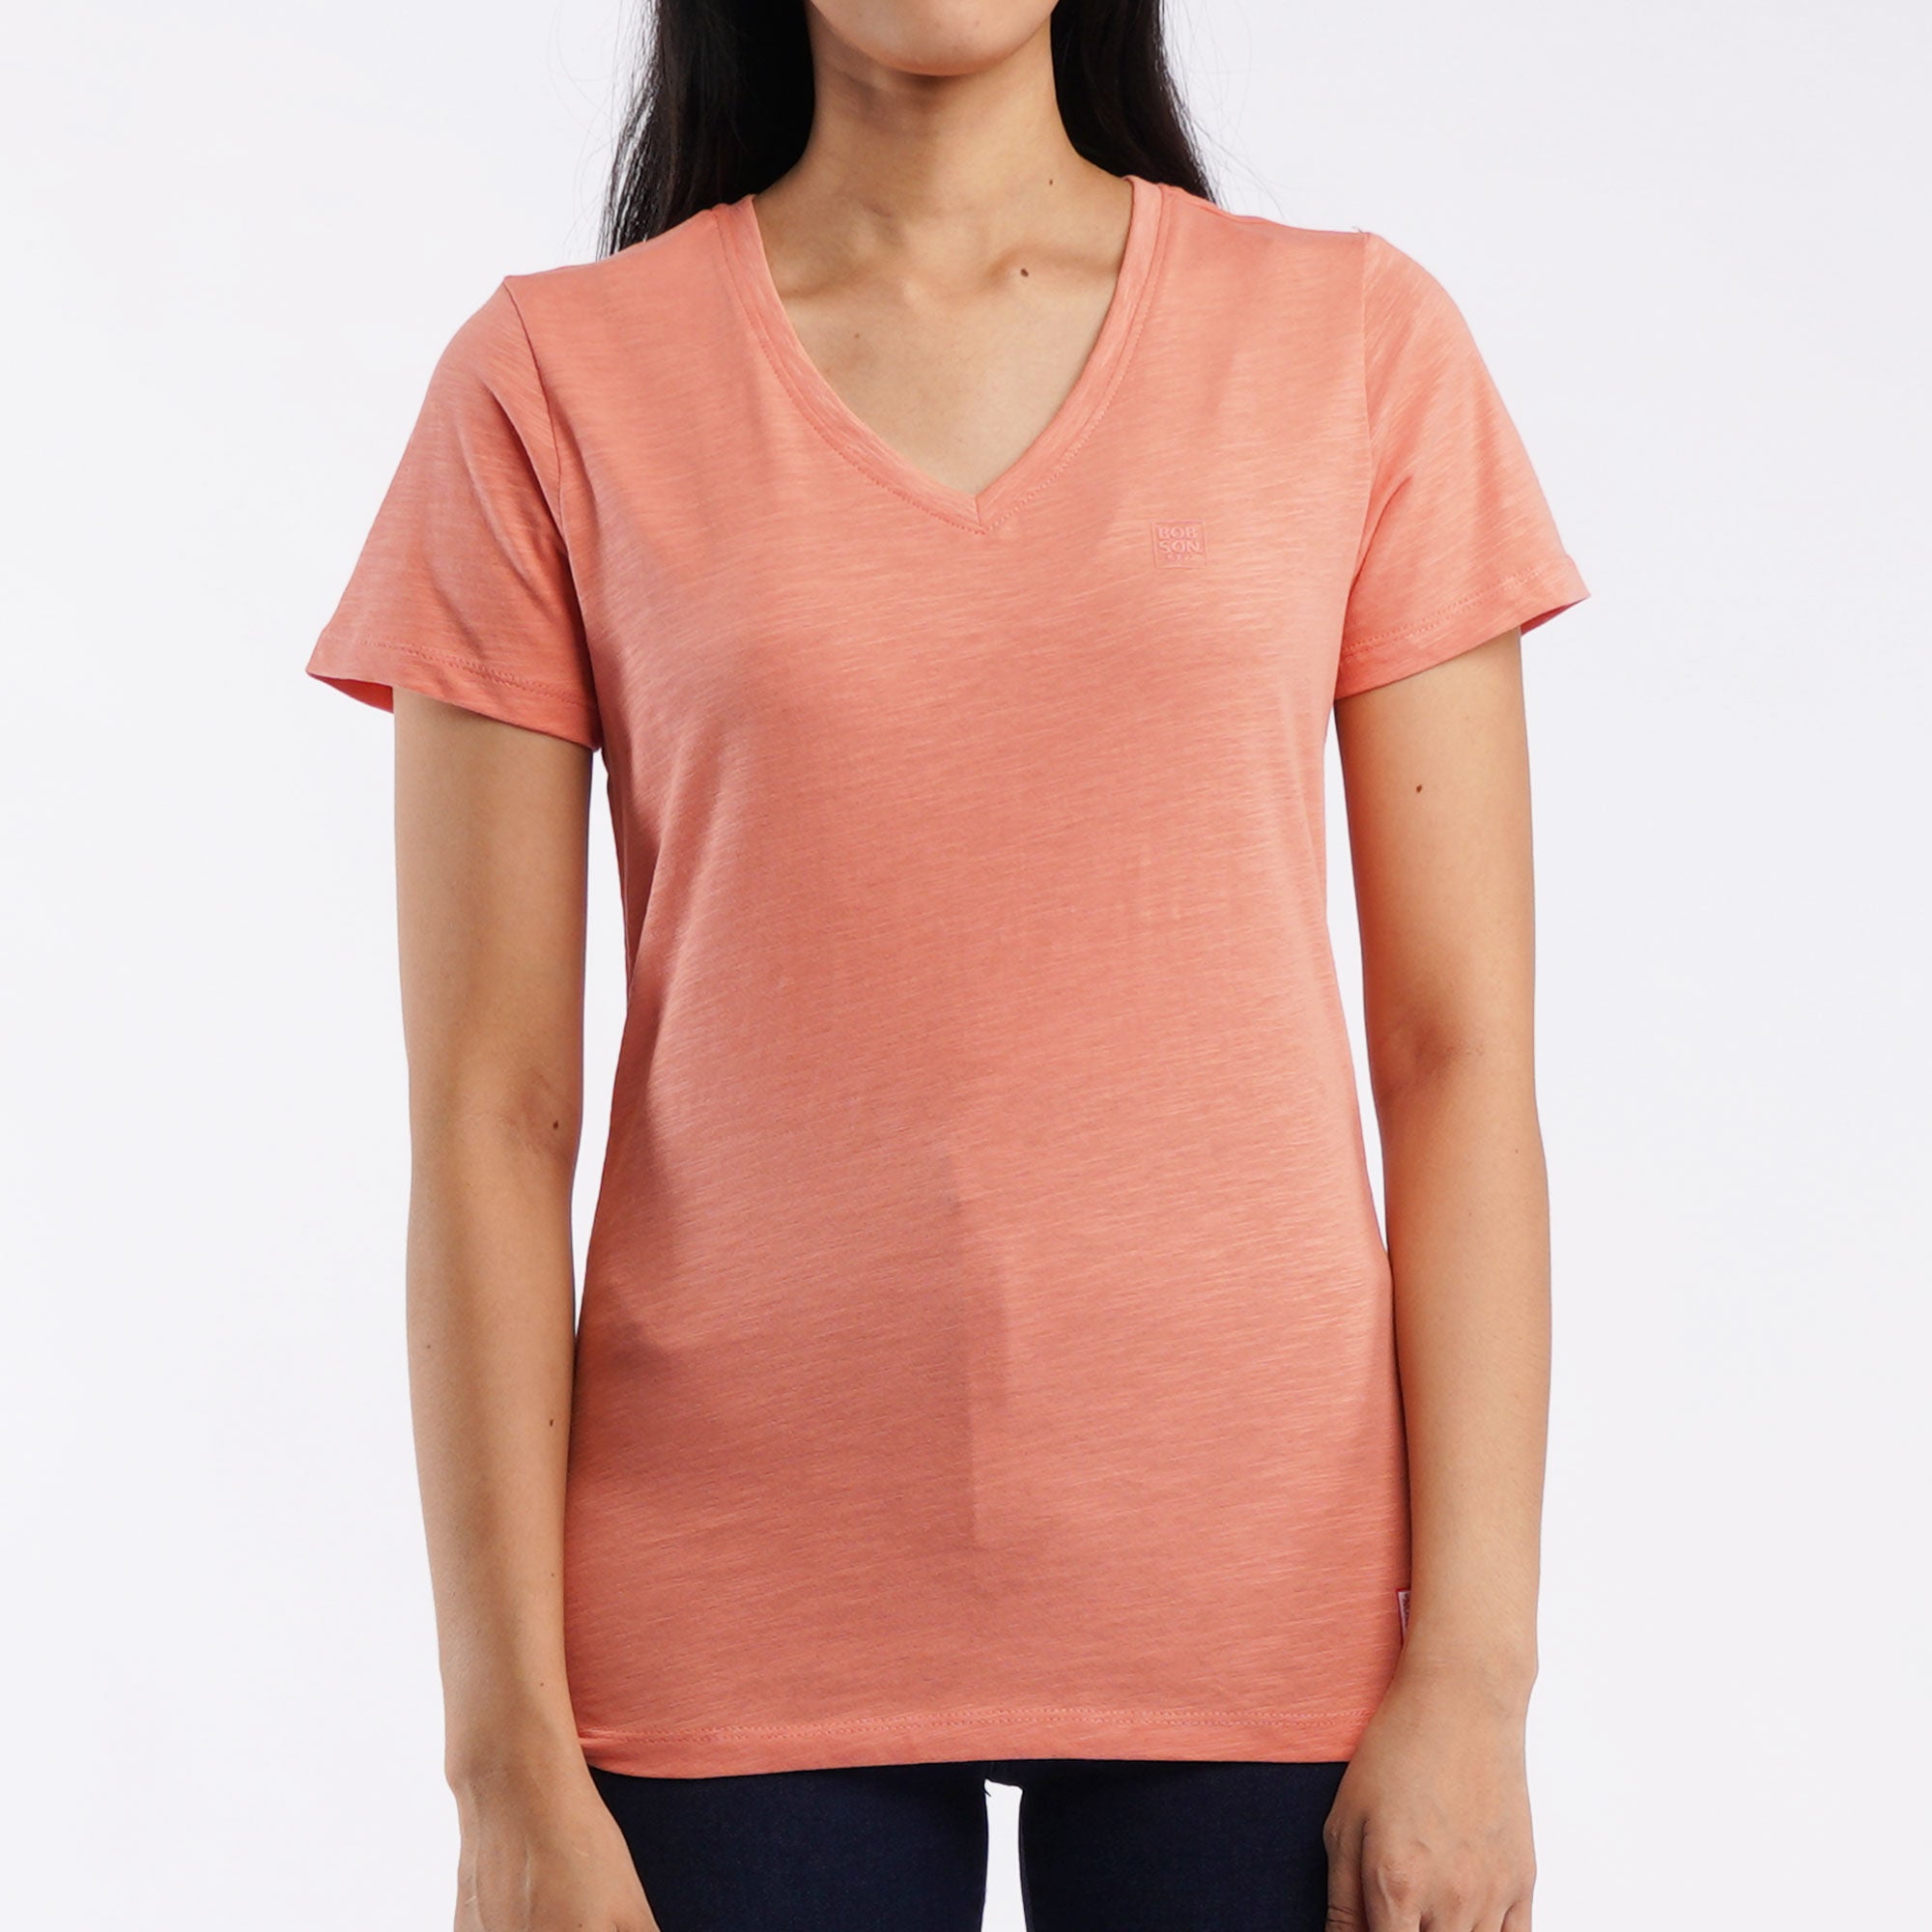 Bobson Japanese Ladies Basic Tees Fashionable Casual Apparel Plain V-Neck T-shirt For Women Trendy Fashion High Quality Plain Tops For Women Regular Fit 106626-U (Coral)